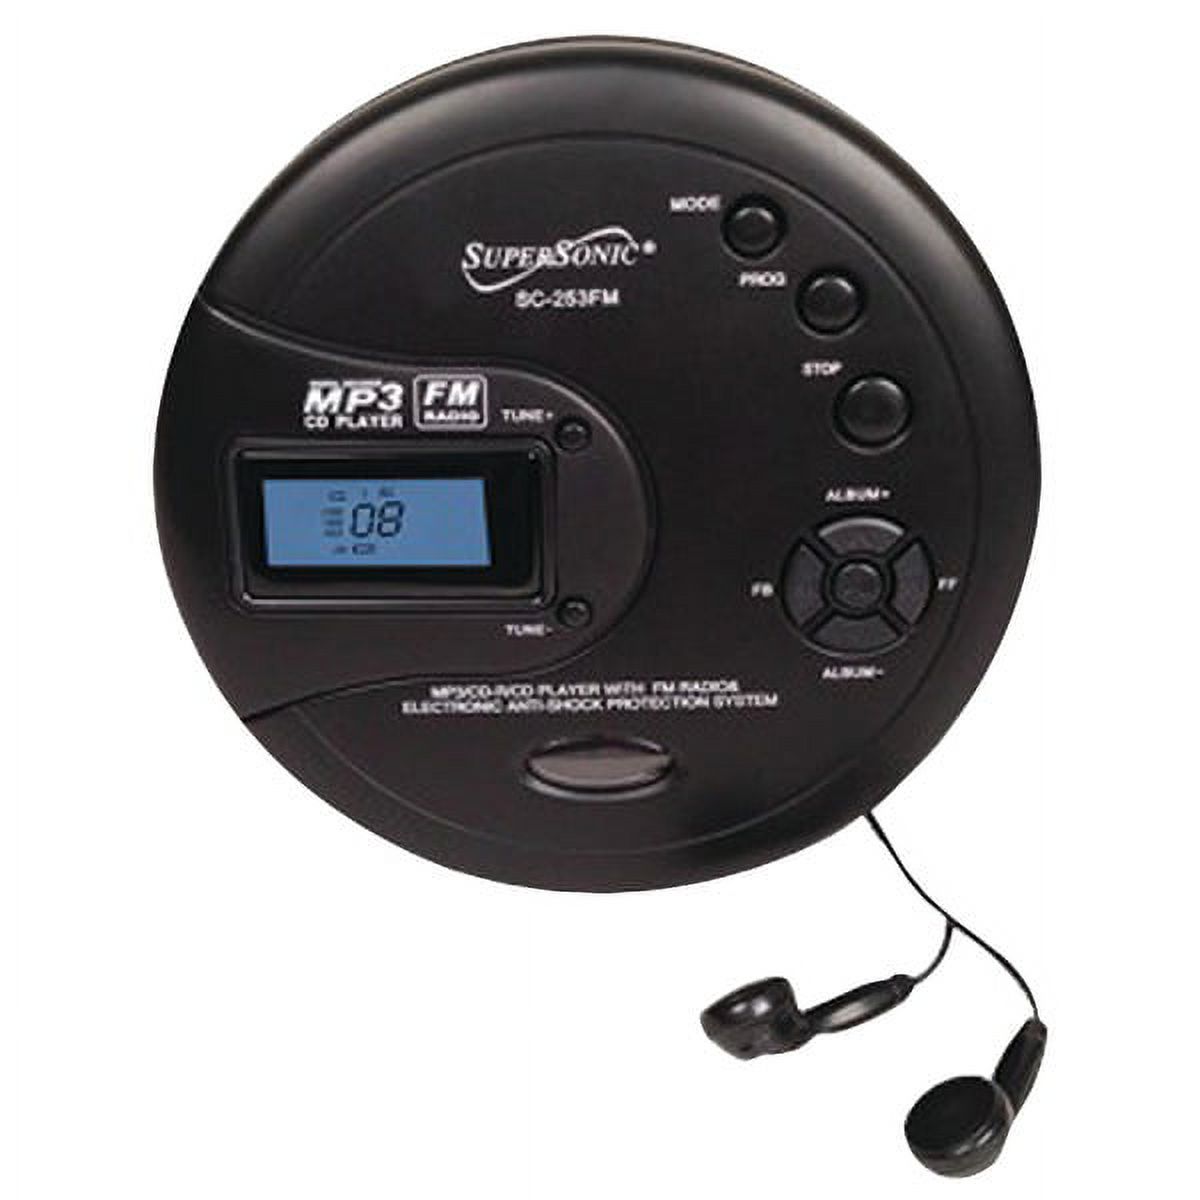 Supersonic Personal Mp3/cd Player With Fm Radio - image 1 of 1